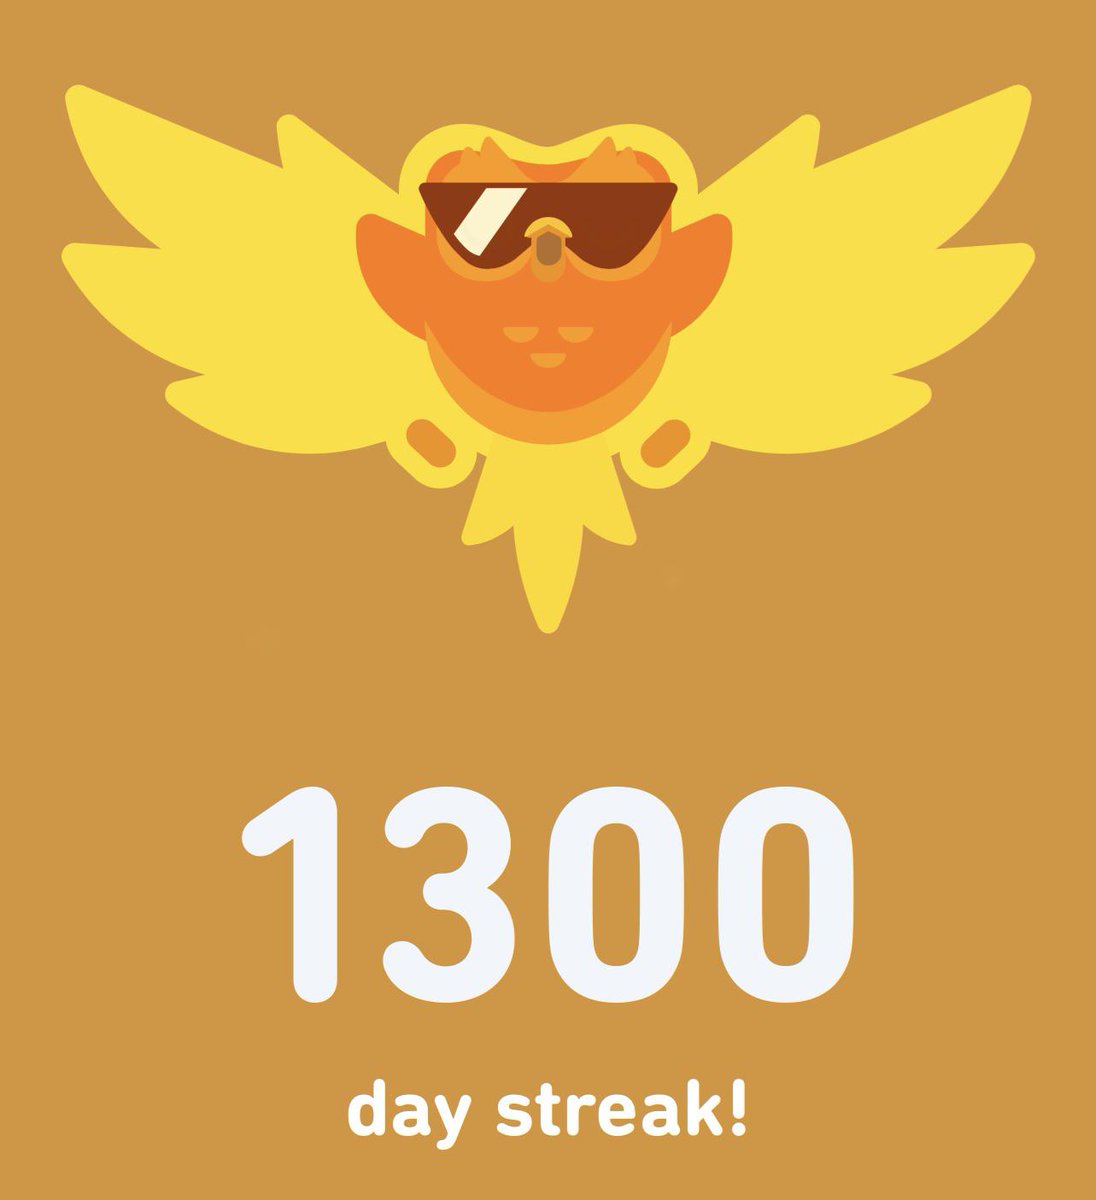 Thirteen isn't normally a lucky number (unless you are @taylorswift of course) but 1300 sure is for me!! It's been 1300 days since the last time I had any alcohol. To say that I'm proud is an understatement. #celebration #noalcohol #sober #proudofme